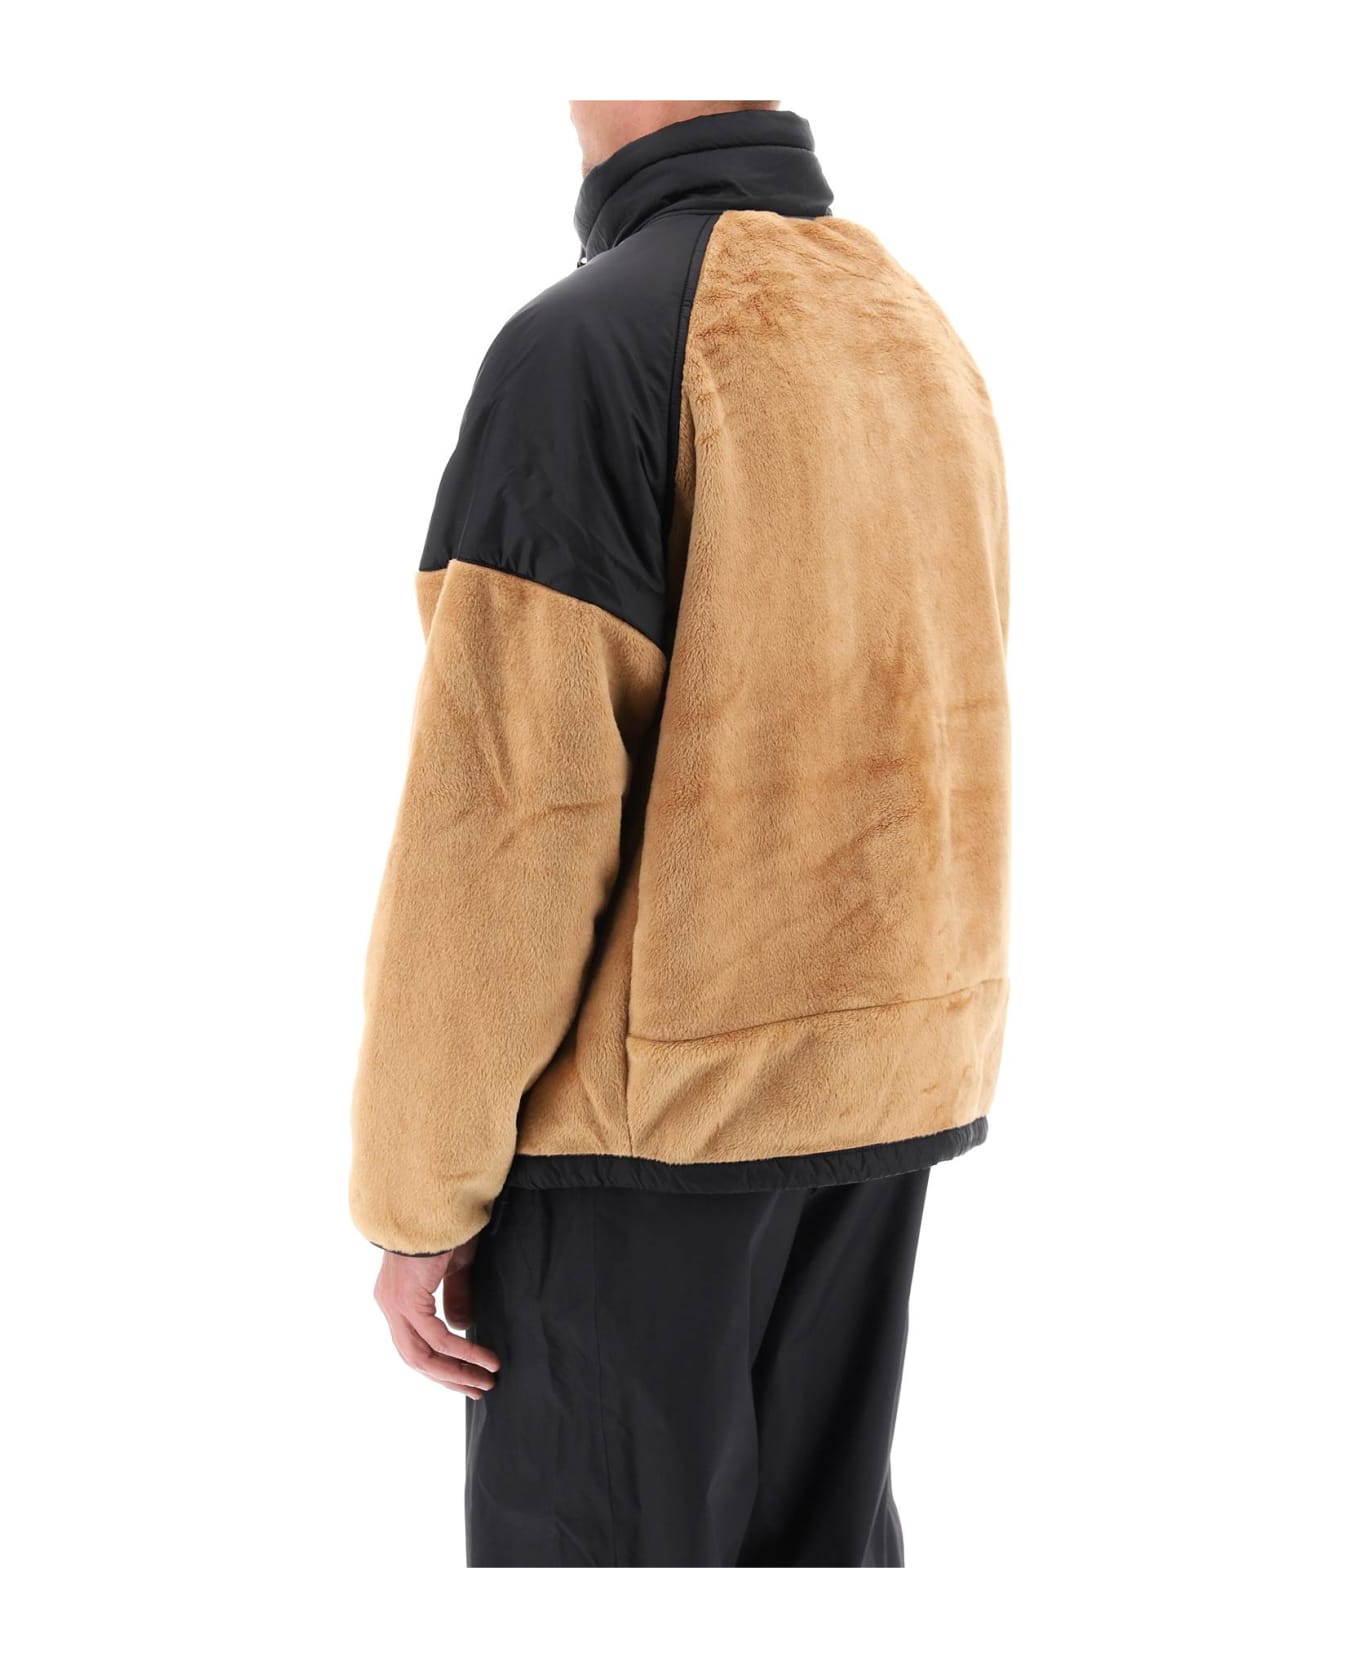 The North Face Fleece Jacket With Nylon Inserts - ALMOND BUTTERTNF BLACK (Beige) ジャケット